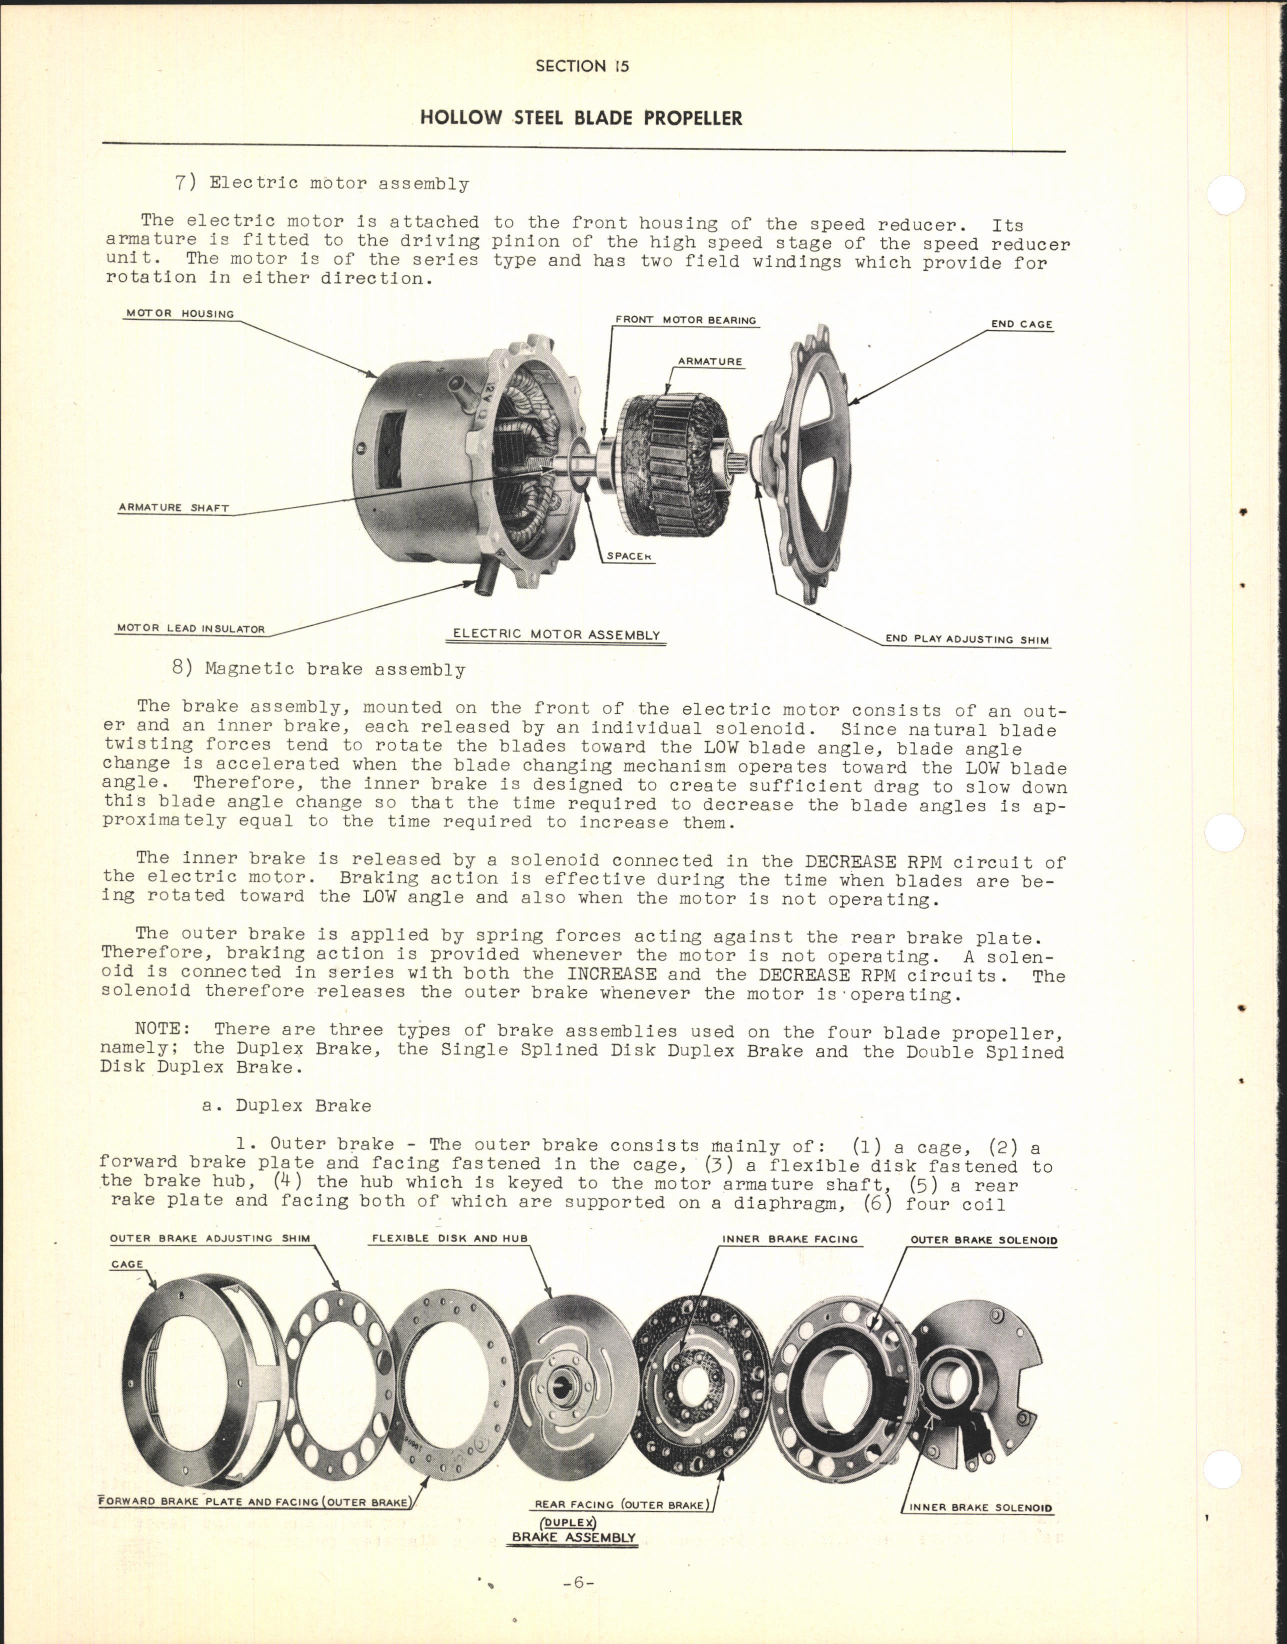 Sample page 8 from AirCorps Library document: Section 15 - Hollow Steel Blade Propeller (Four Blade)